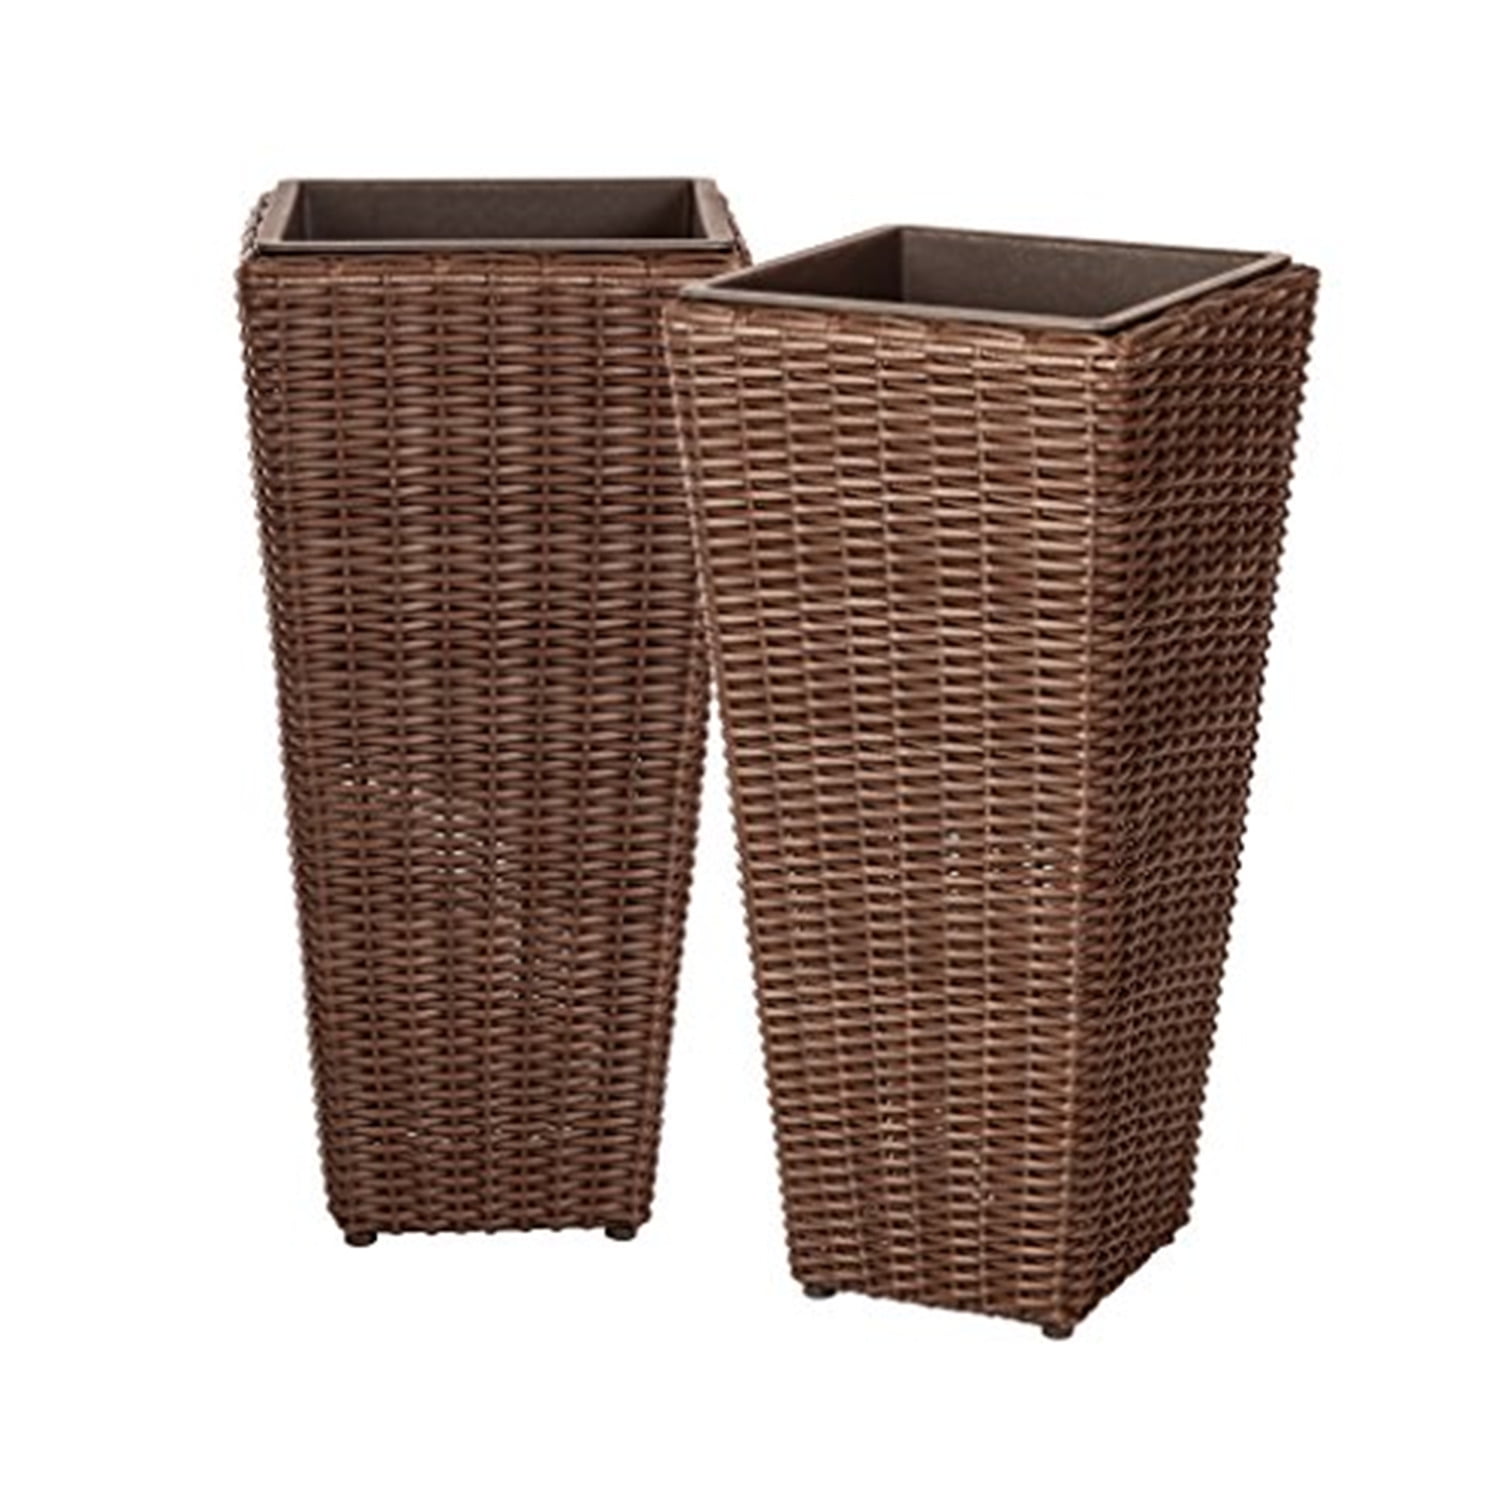 Patio Sense 11" x 11" x 23" Round Brown Resin Plant Planter with Drainage Hole (2 Piece) - image 1 of 9